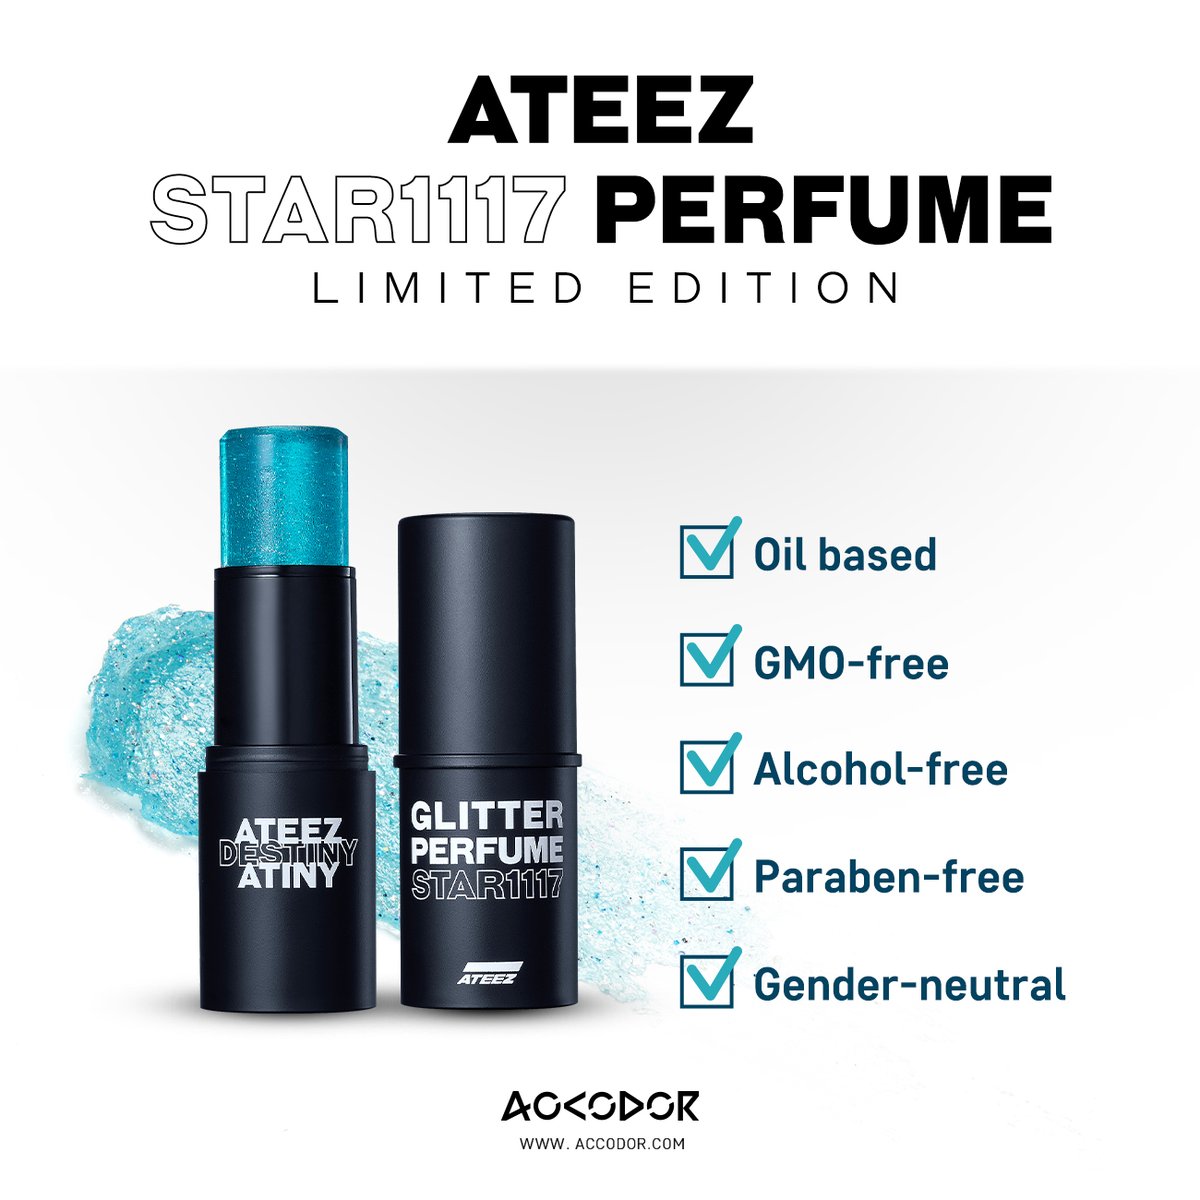 #ATINY - 5️⃣ days left to #JoinTheFellowship and get your hands on the exclusive #Star1117 perfume! 🍃

Made by ATEEZ, inspired by ATINY 🧡

👋Don't miss out! > mmt.fans/Hzd6

#ATEEZ #STAR1117 #TattooPerfume